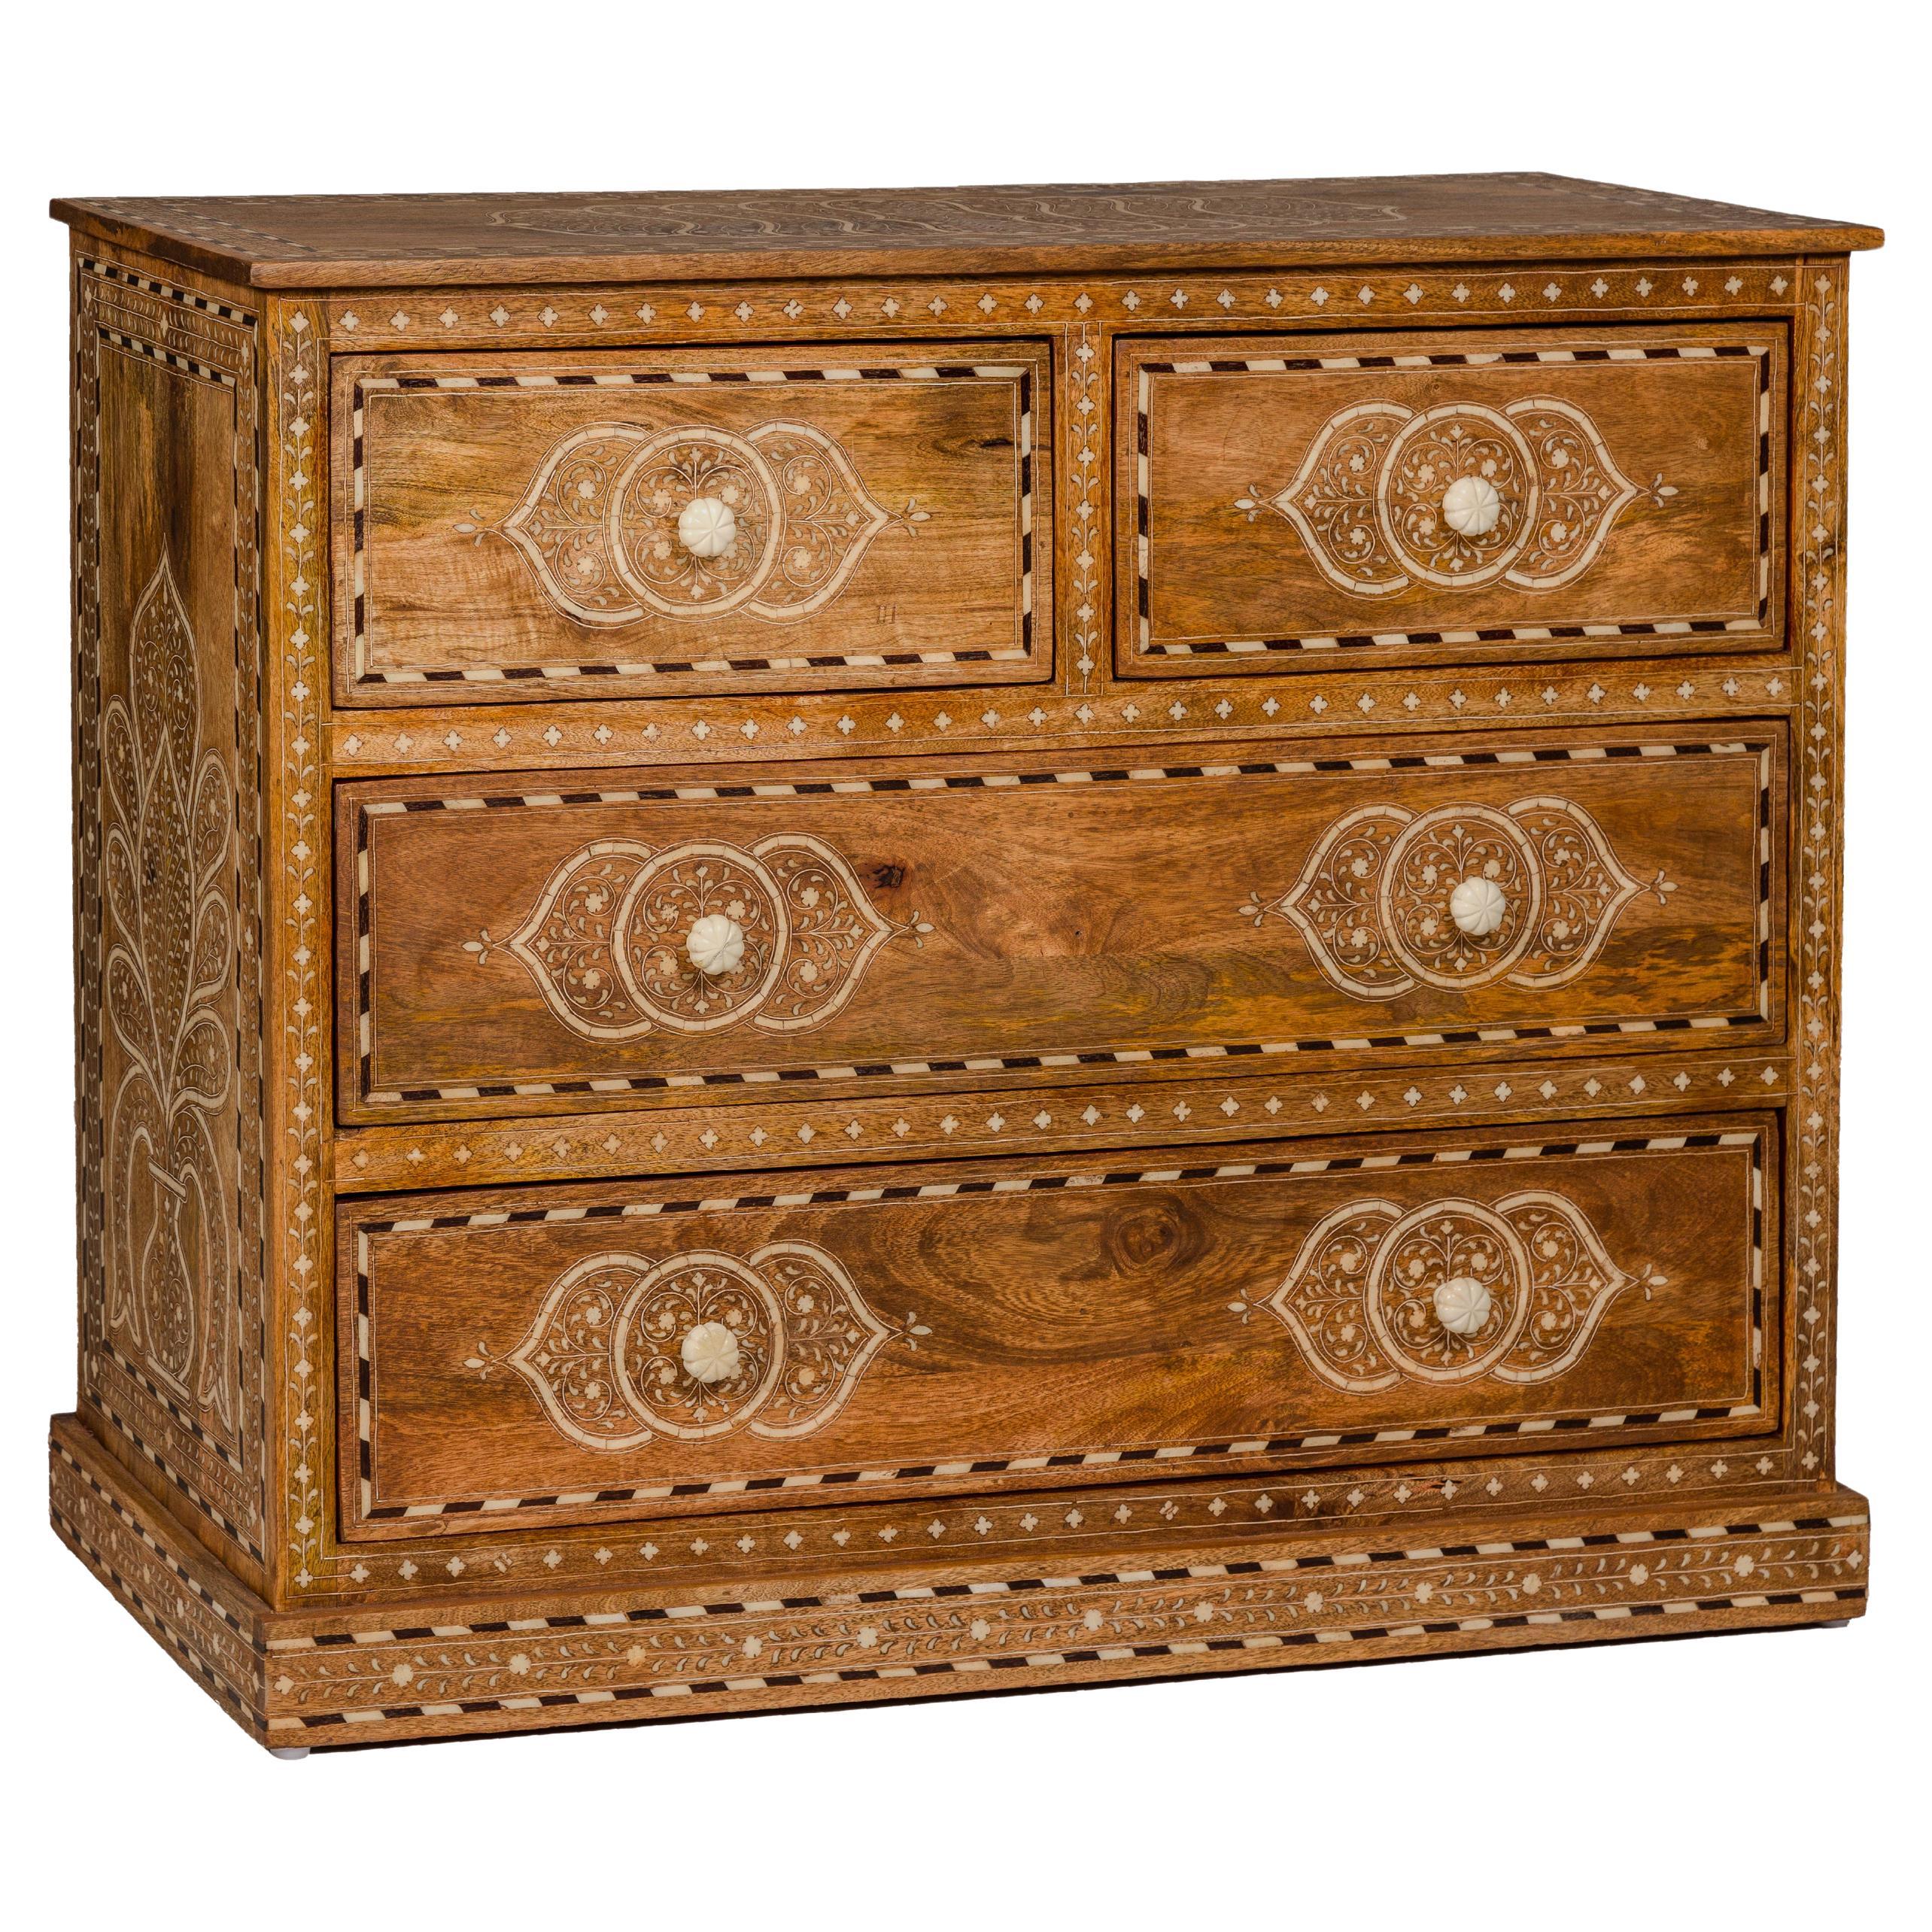 Anglo-Indian Mango Wood Four-Drawer Chest with Floral Themed Bone Inlay For Sale